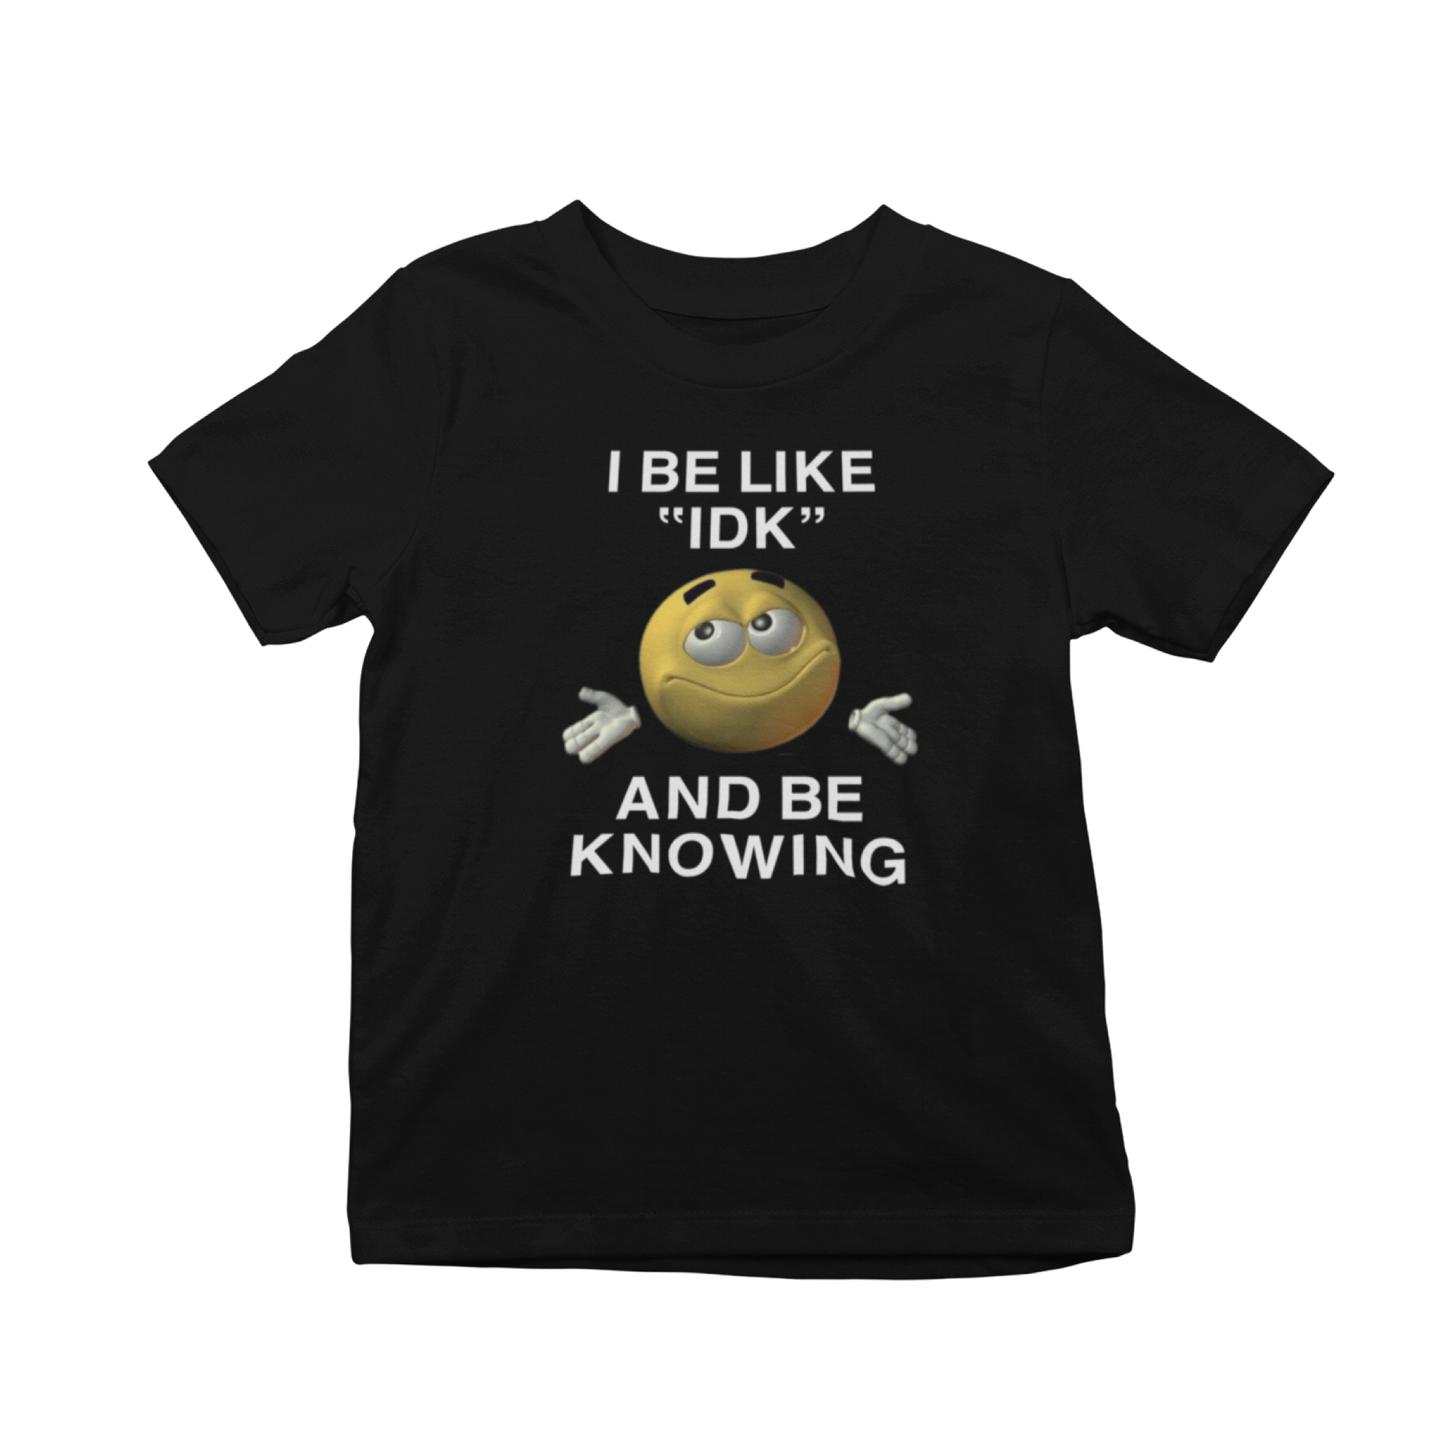 I Be Like "IDK" And Be Knowing T-Shirt